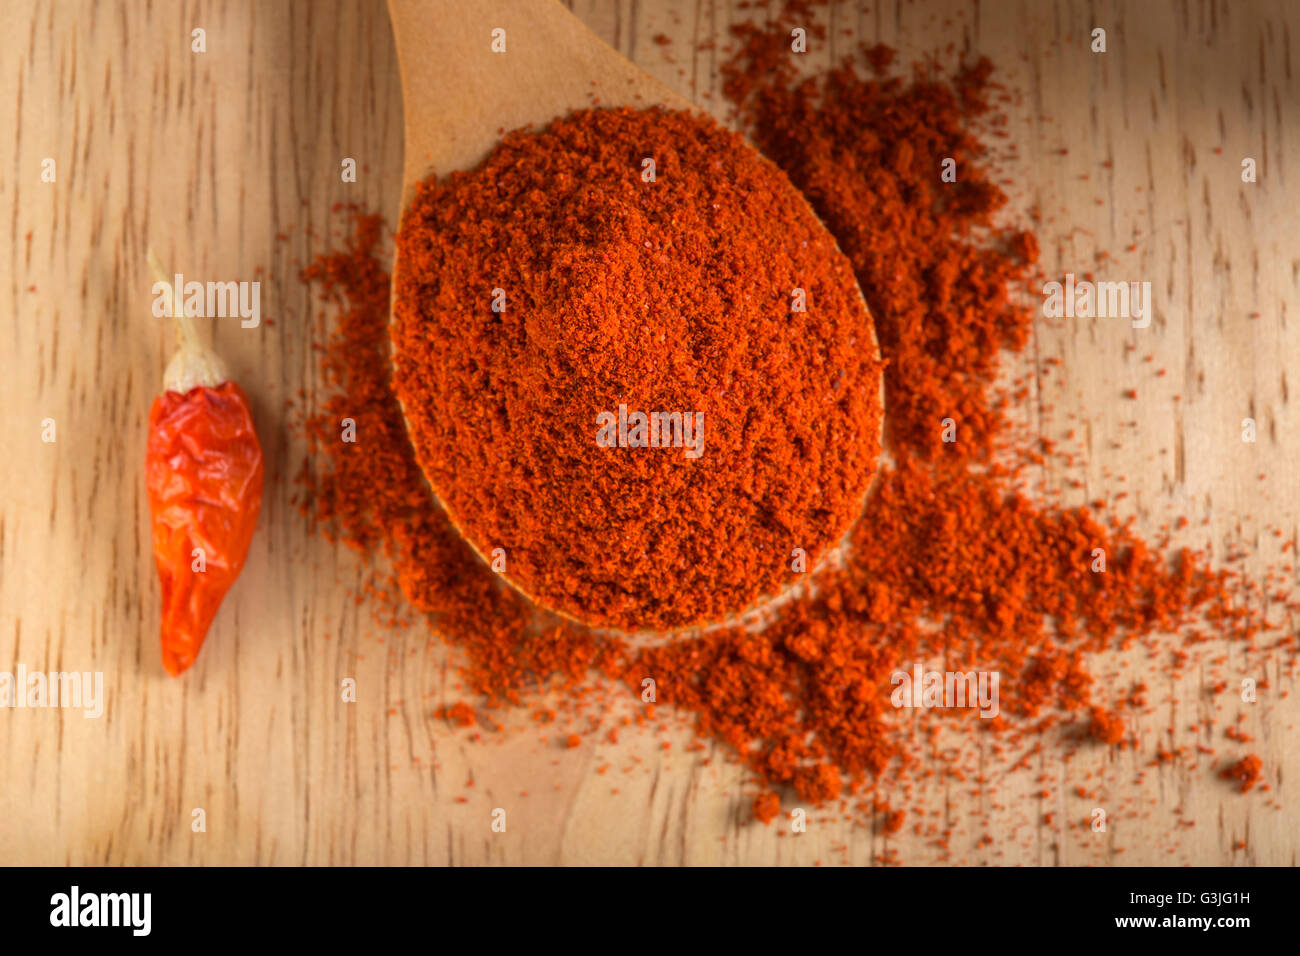 Spoon filled with red hot chili pepper and paprika powder over wooden background Stock Photo